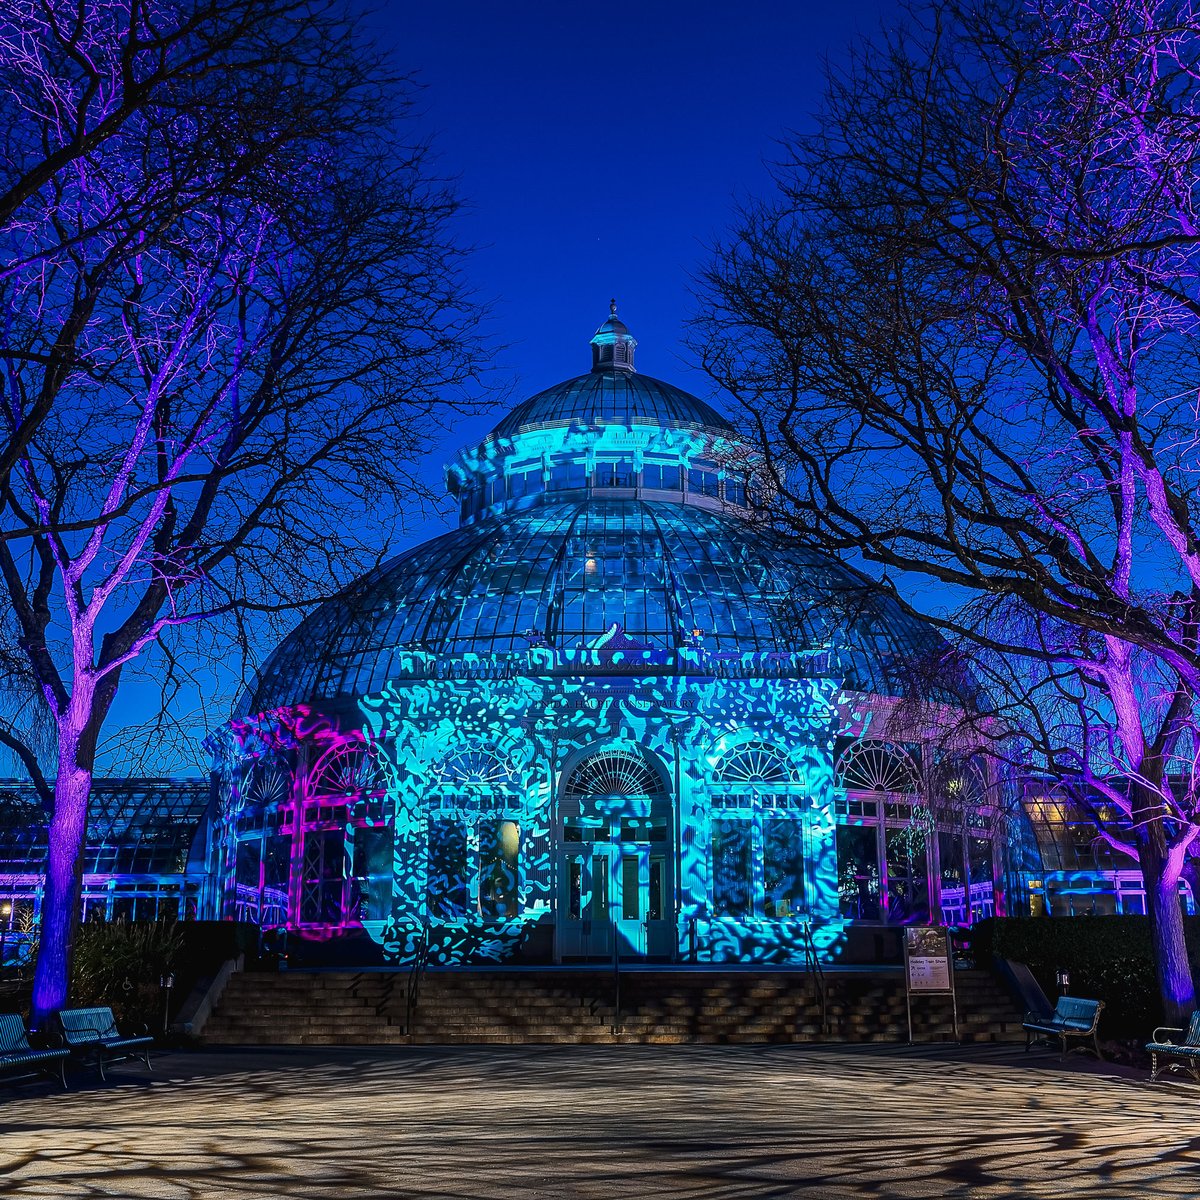 New York Botanical Garden On Twitter Nybg Glow Is On At The Garden Learn More About These Outdoor After Dark Events That Bring Music Dance And More To The Garden This Holiday